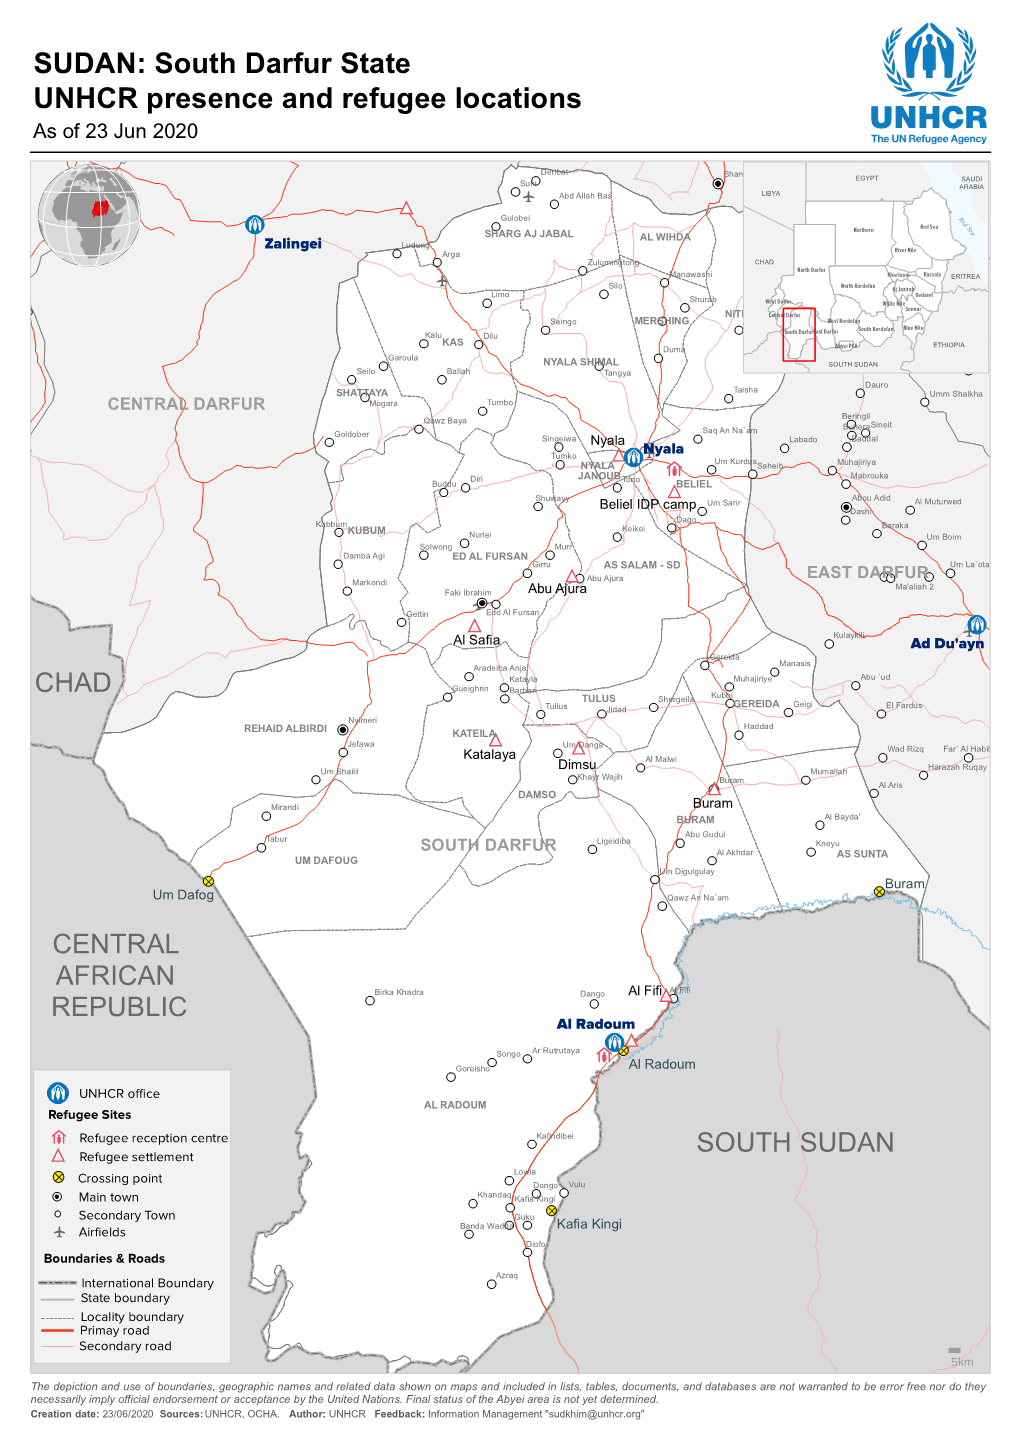 South Darfur State UNHCR Presence and Refugee Locations As of 23 Jun 2020